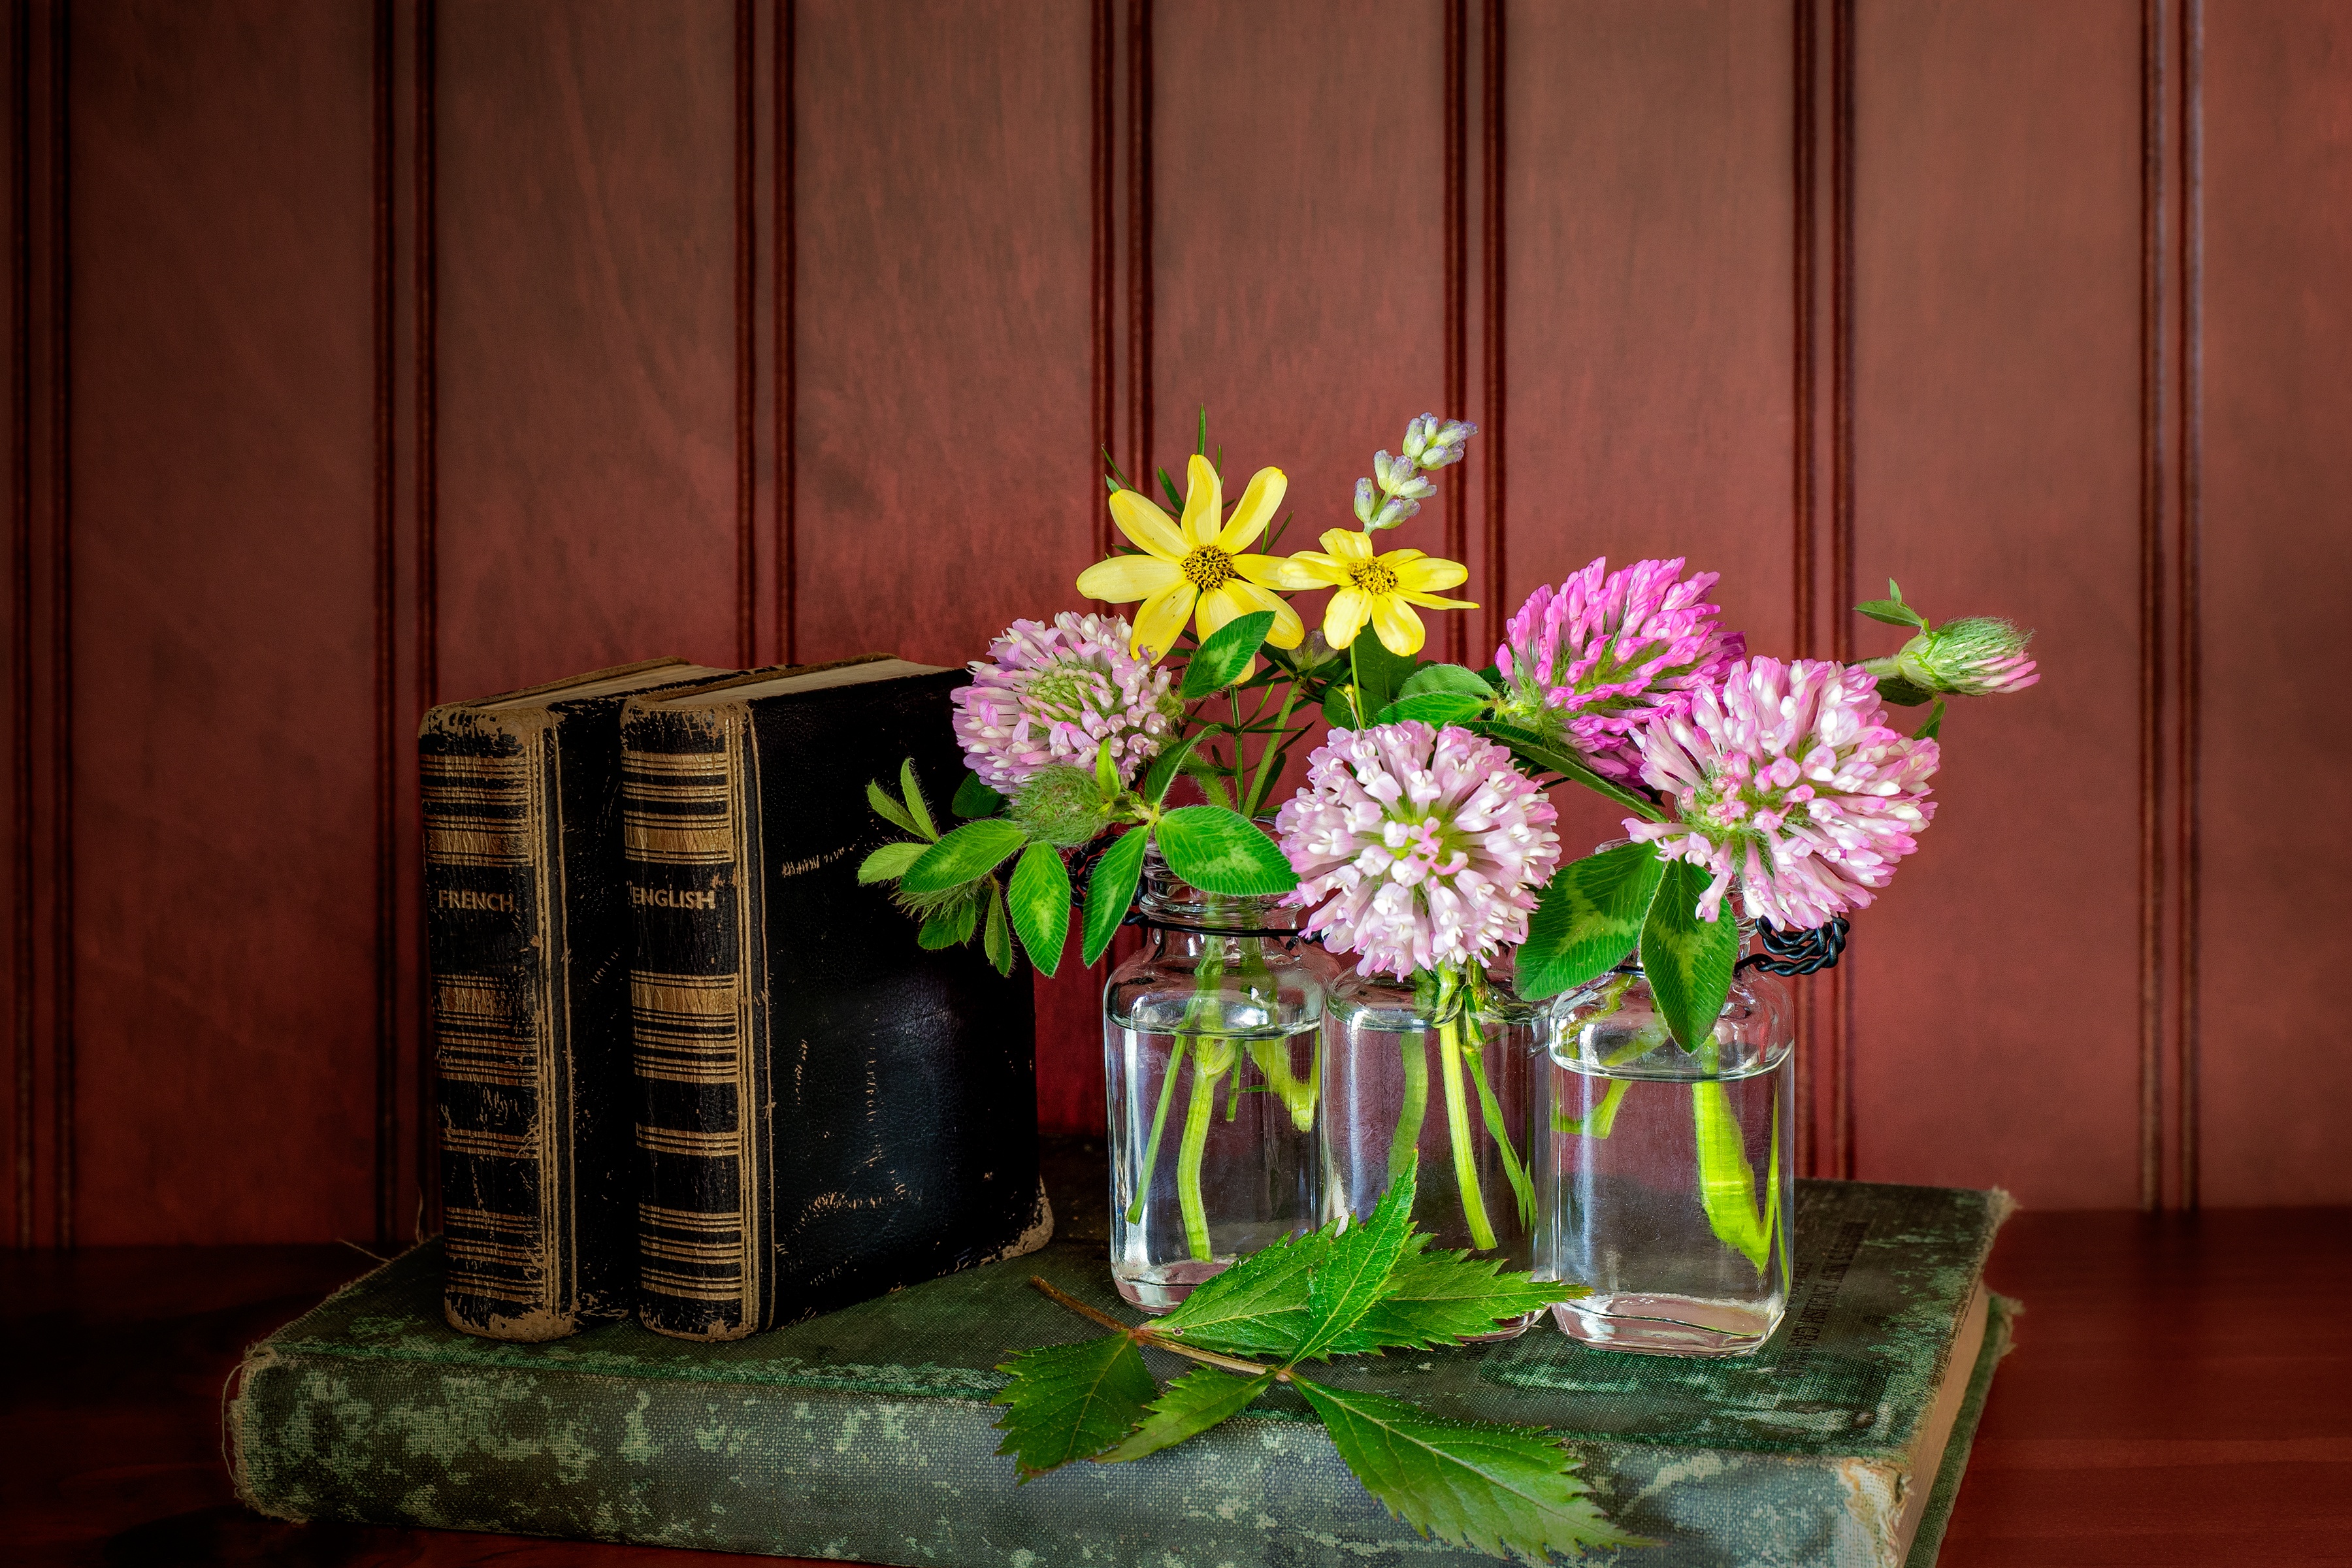 BOOKS AND BLOOMS - I thank my wife for this pleasant little arrangement of books and wild flowers.